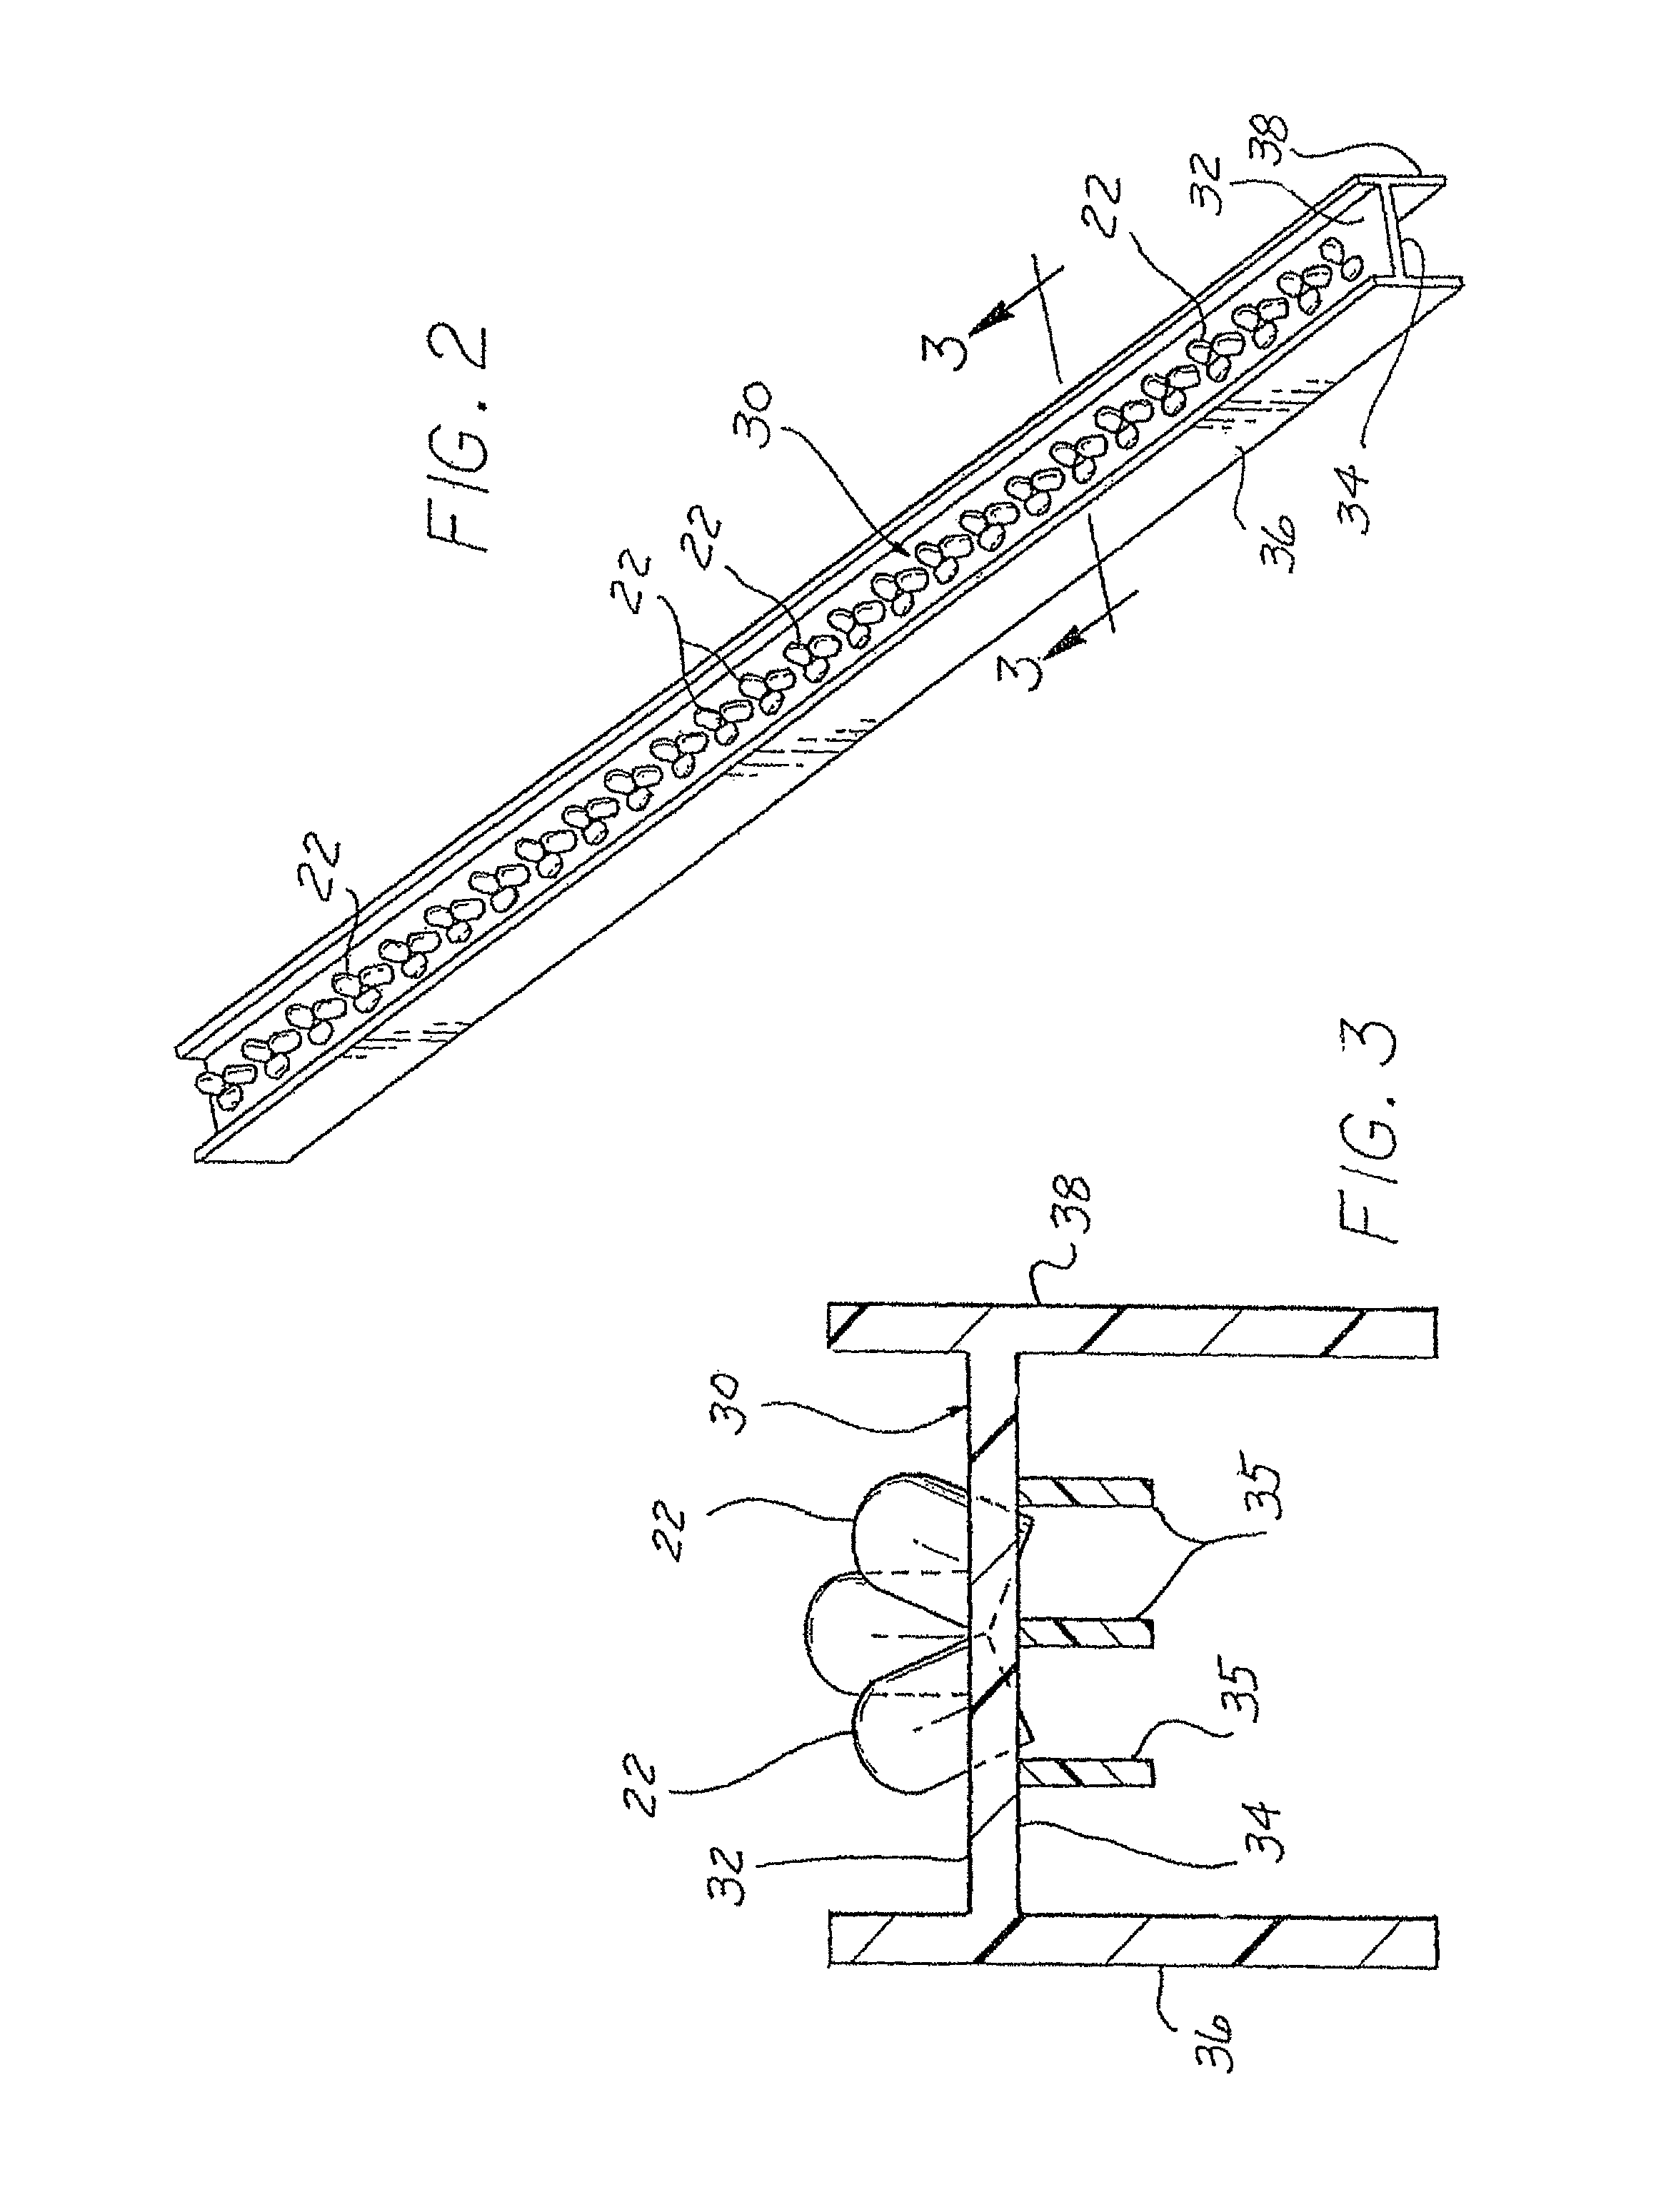 Light sources incorporating light emitting diodes